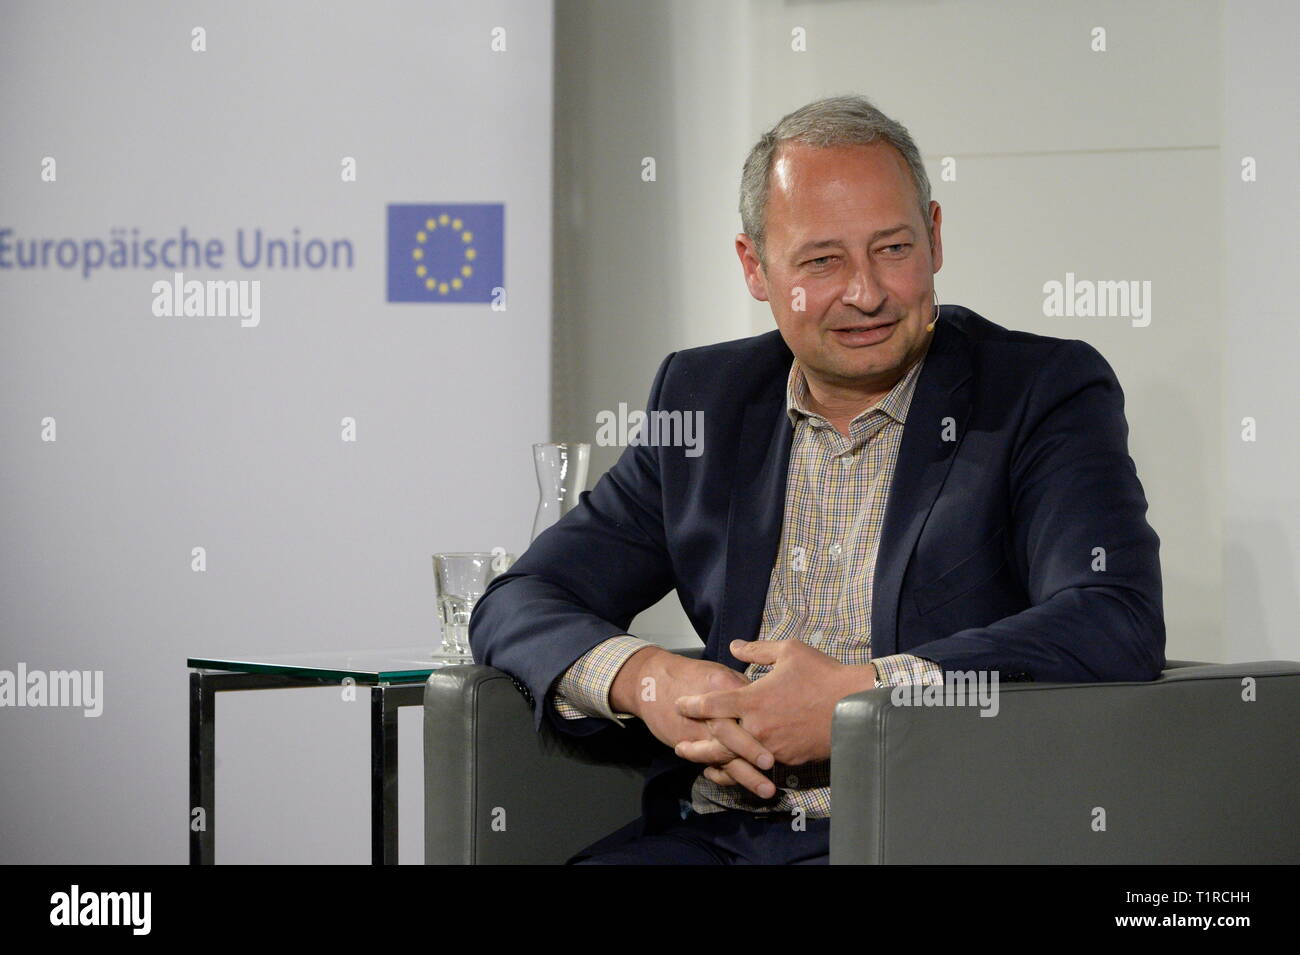 Vienna, Austria. March 28, 2019. Dialogue with Andreas Schieder (SPÖ Social Democratic Party of Austria) in the House of the European Union. Picture shows the top candidate of the SPÖ Andreas Schieder. Credit: Franz Perc / Alamy Live News Stock Photo